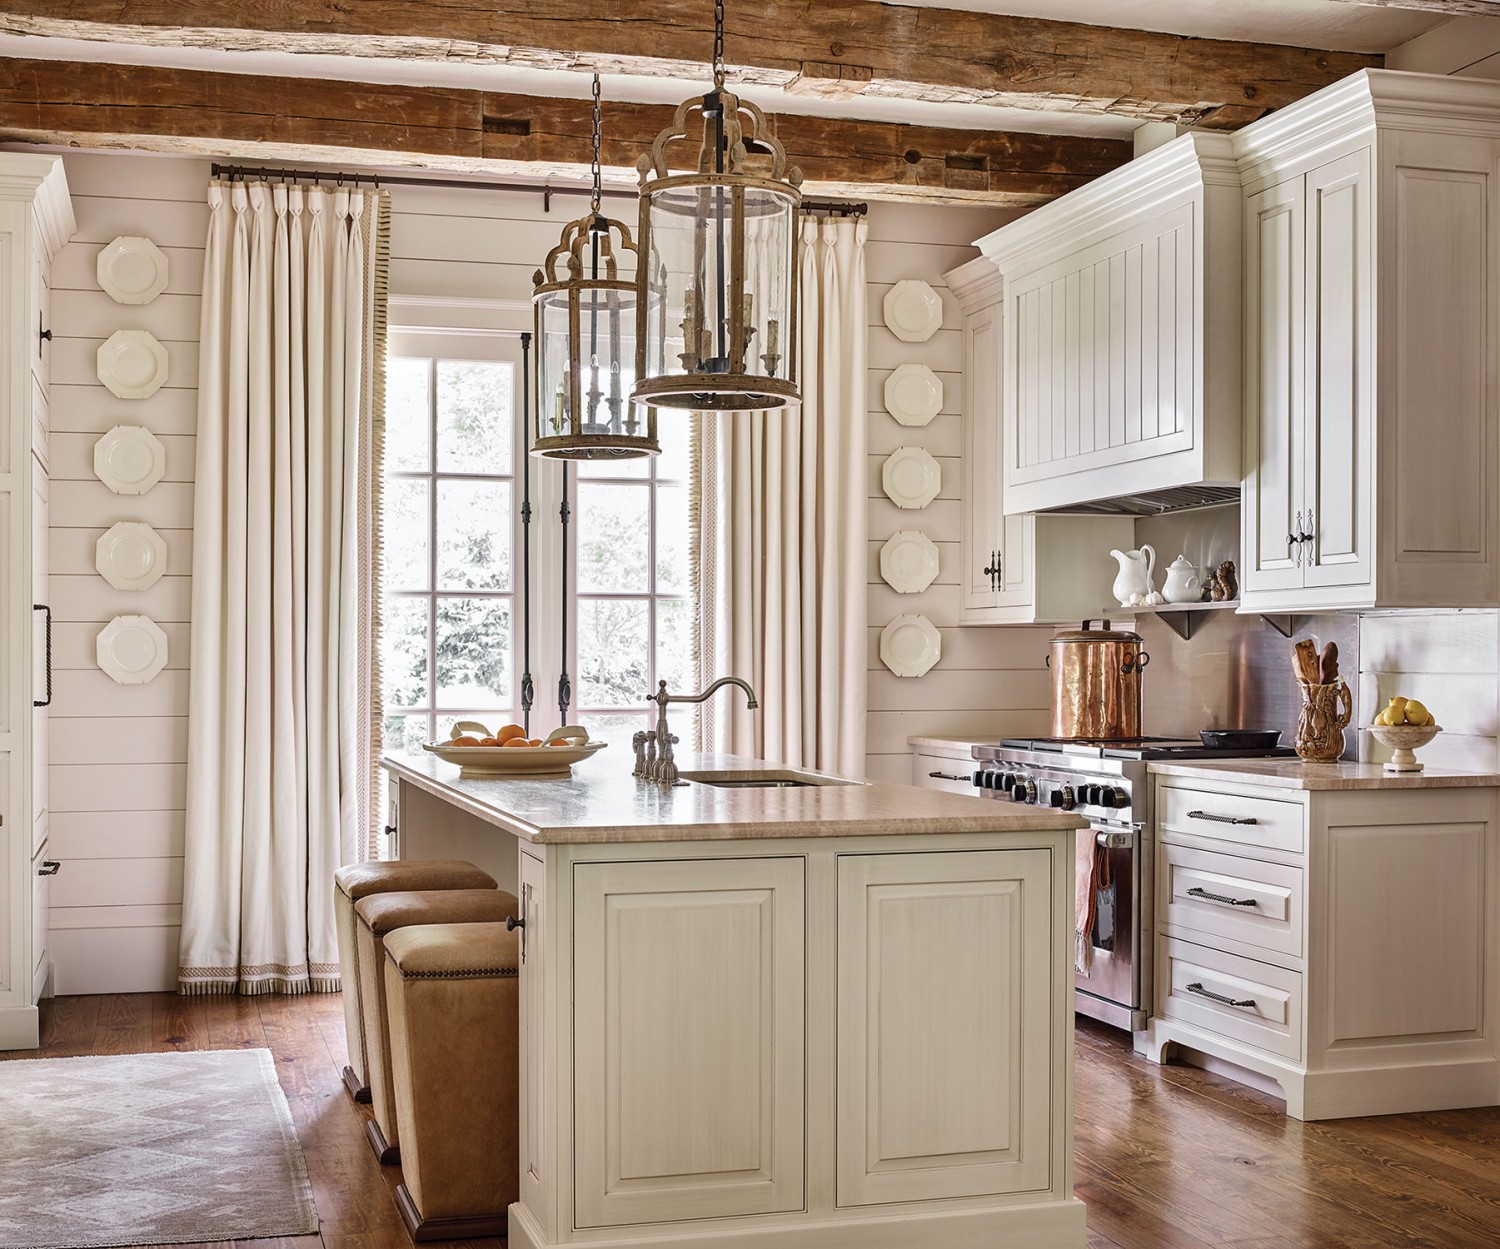 Francie Hargrove stuck with a white and neutral color palette in this mountain house kitchen, including a soft white painted finish for the cabinets and a light, neutral stone countertop. At the kitchen island, square barstools feature solid bases, simple lines, light leather upholstery, and a border of grommets just below the seat. Two large lanterns hang above the island. Five white octagonal porcelain plates hang in a vertical line on either side of soft white curtains, flanking the French doors. A large antique copper pot sits on a stainless steel oven.